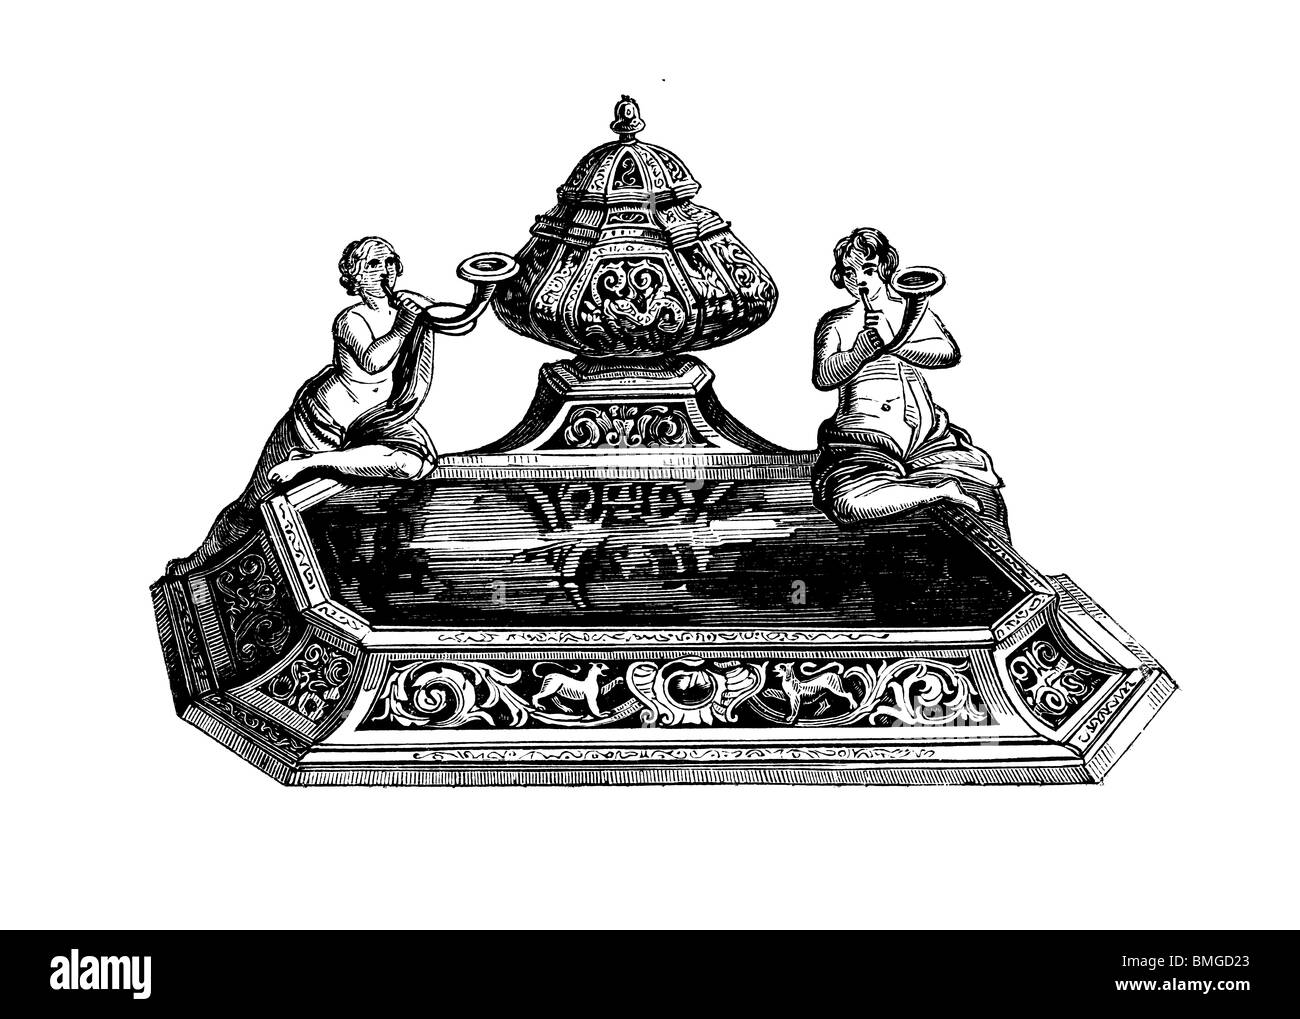 Black and white engraving cut out isolated on white. Illustration of an art item exhibited at the Great London Exhibition 1851. Stock Photo